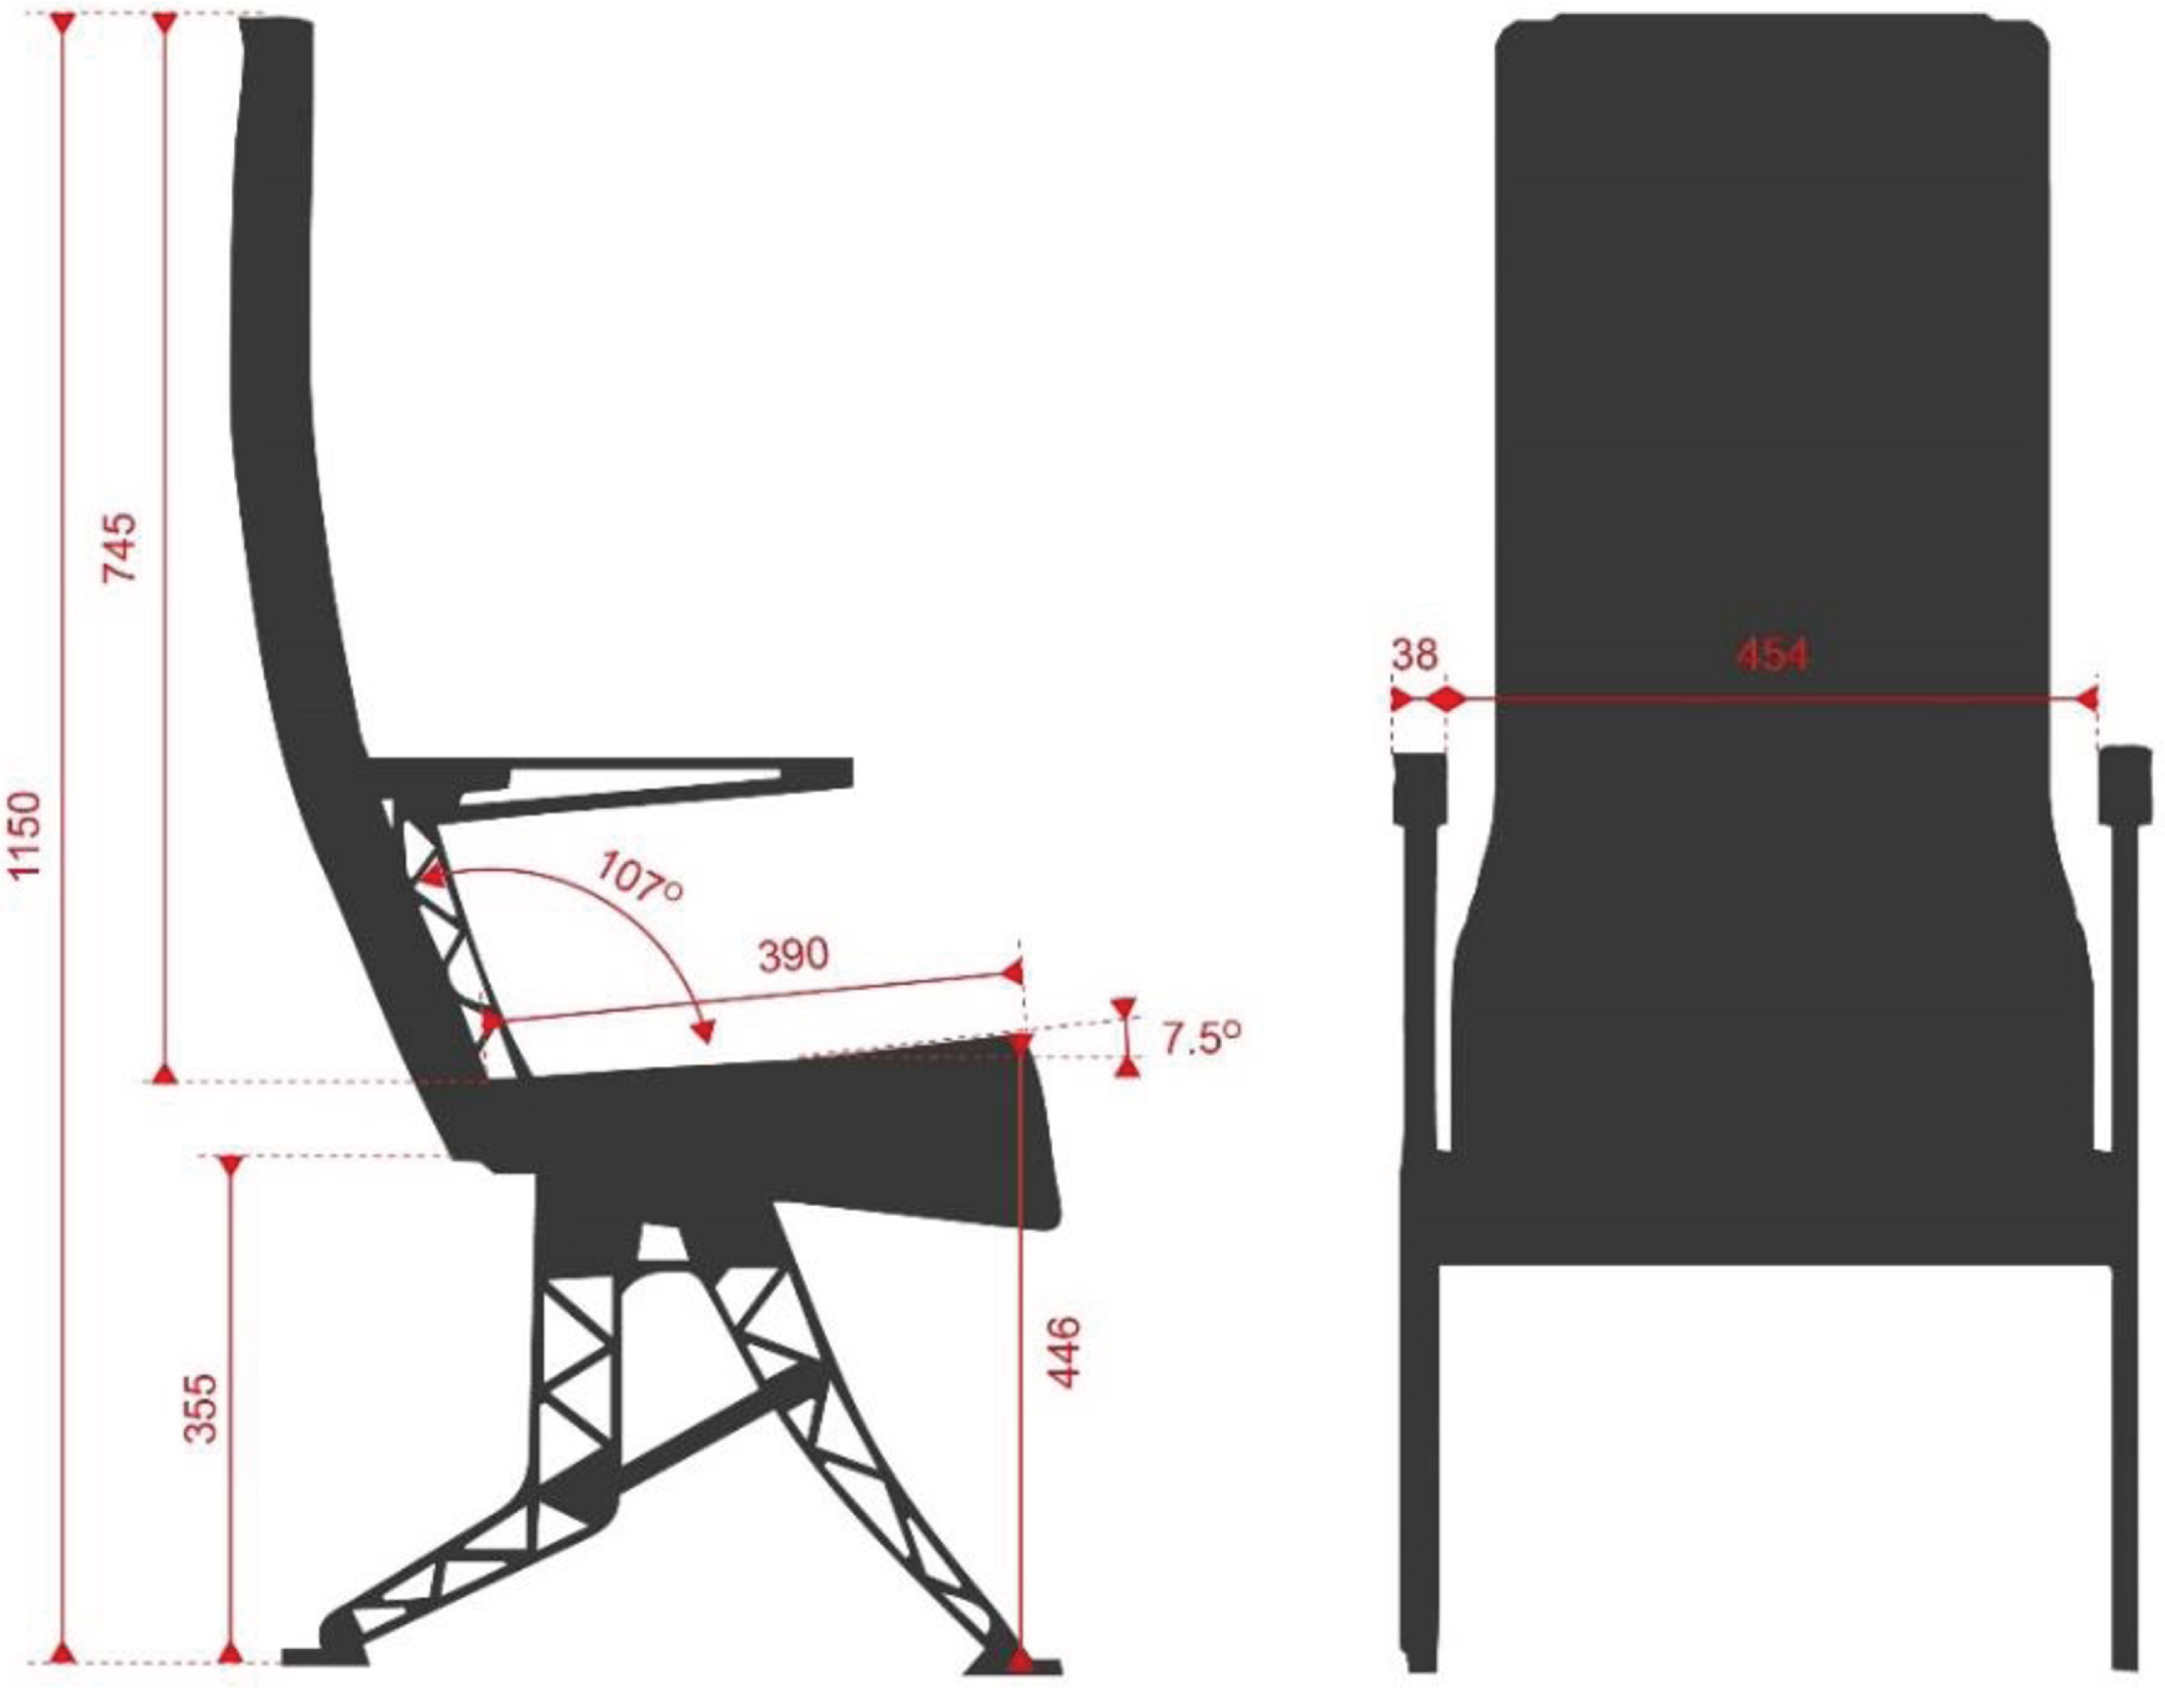 Dimensions of the Rebel Aero aircraft seat used in the test.